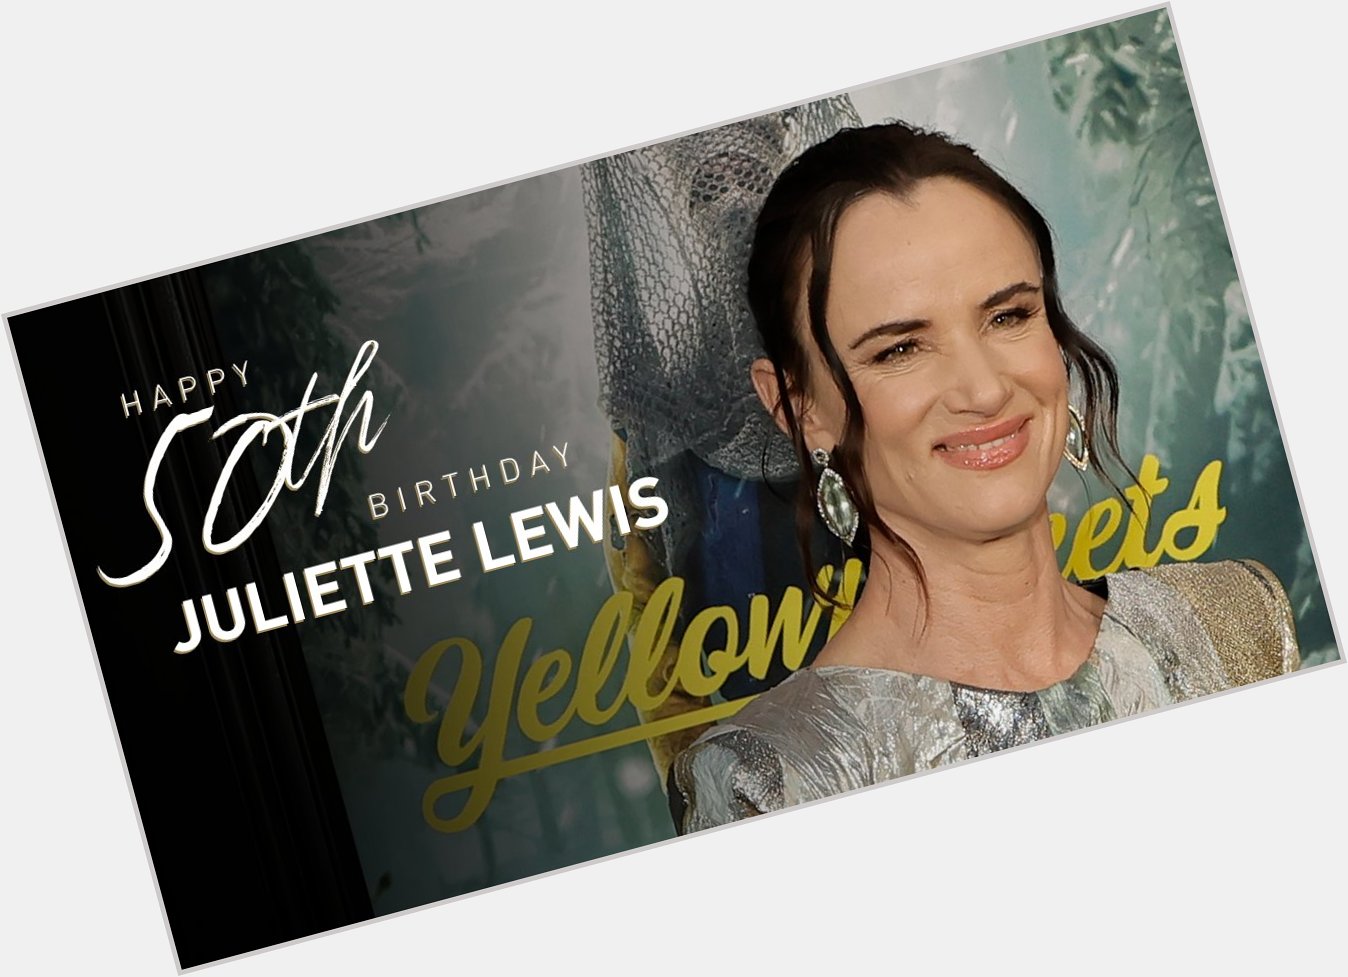 Happy 50th birthday Juliette Lewis!

Read her tribute here:  